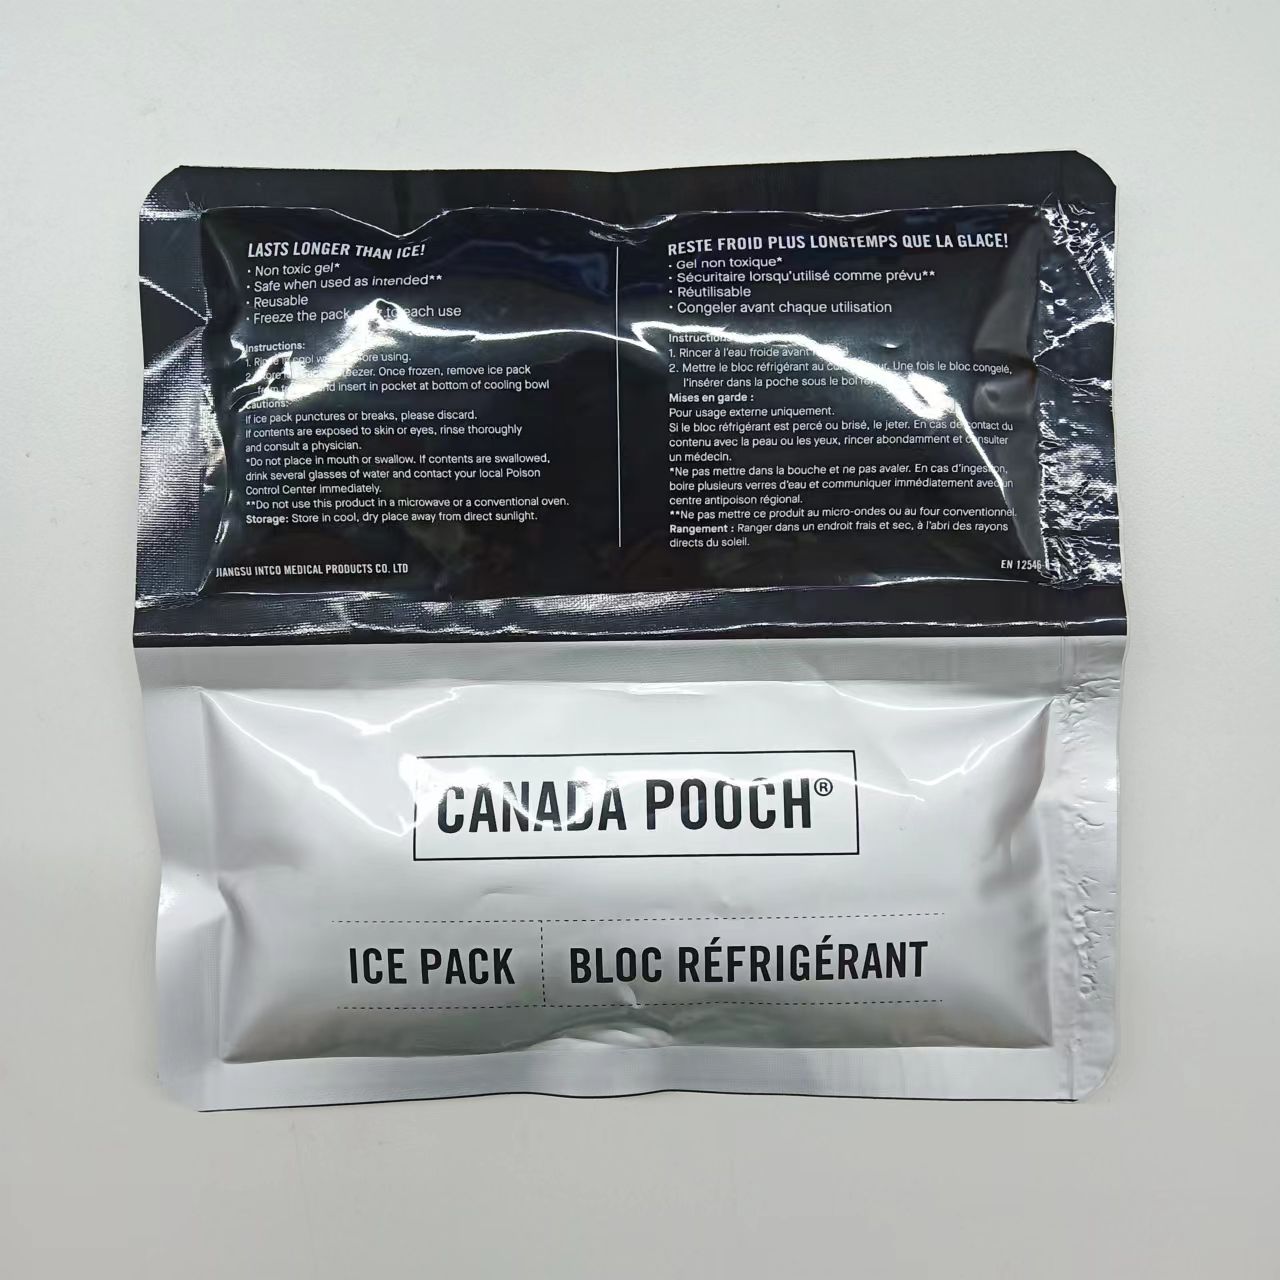 Luna Ice Gel Ice Packs - Dry Ice for Shipping Frozen Food, Lunch Bags & Injuries - Reusable & Long-Lasting Cold Packs for Coolers, Ice Bag for